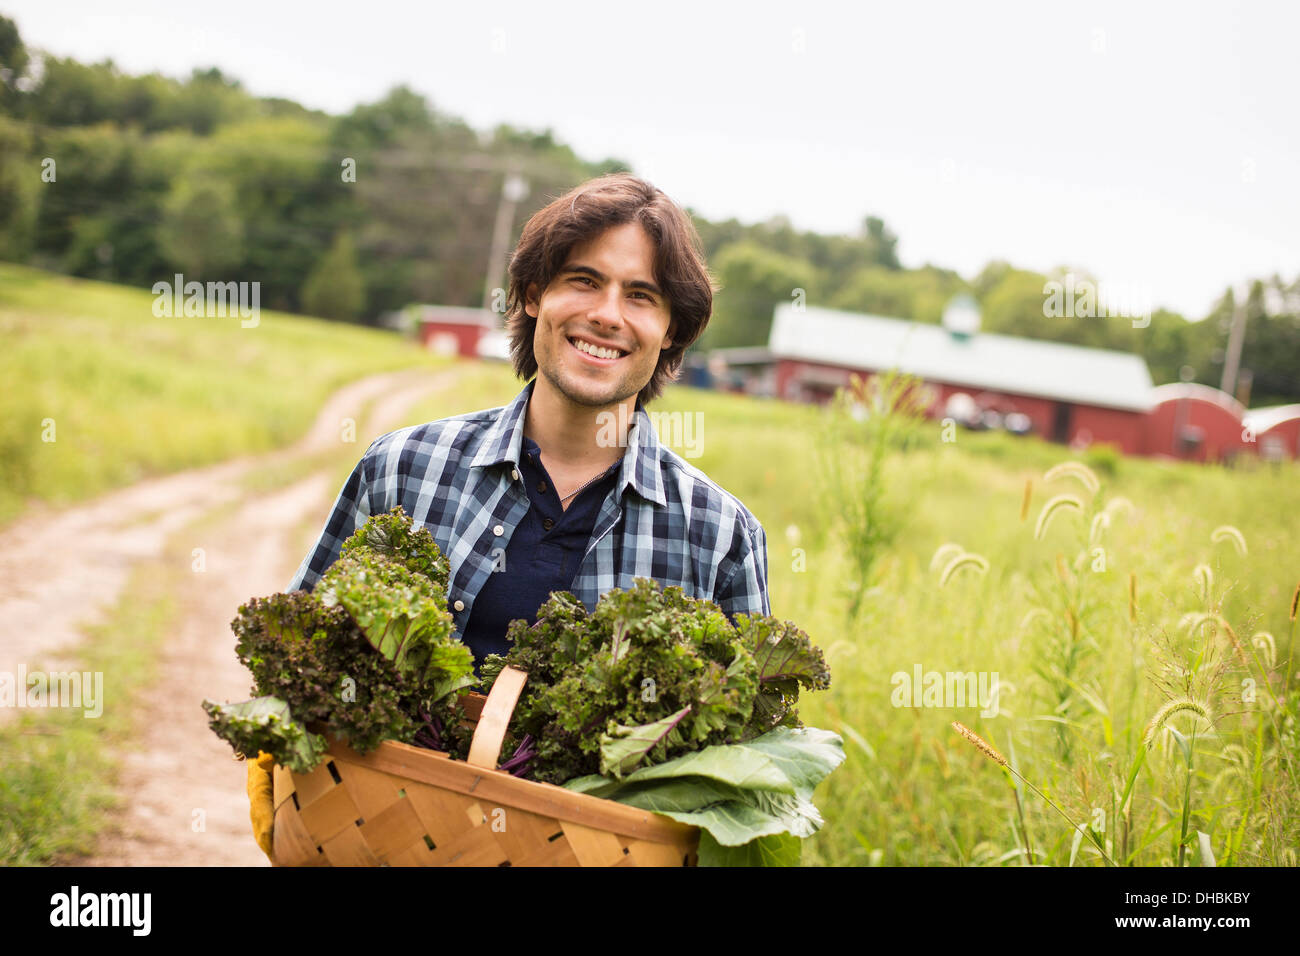 A man carrying a basket full of fresh picked organic vegetables, working on an organic farm. Stock Photo